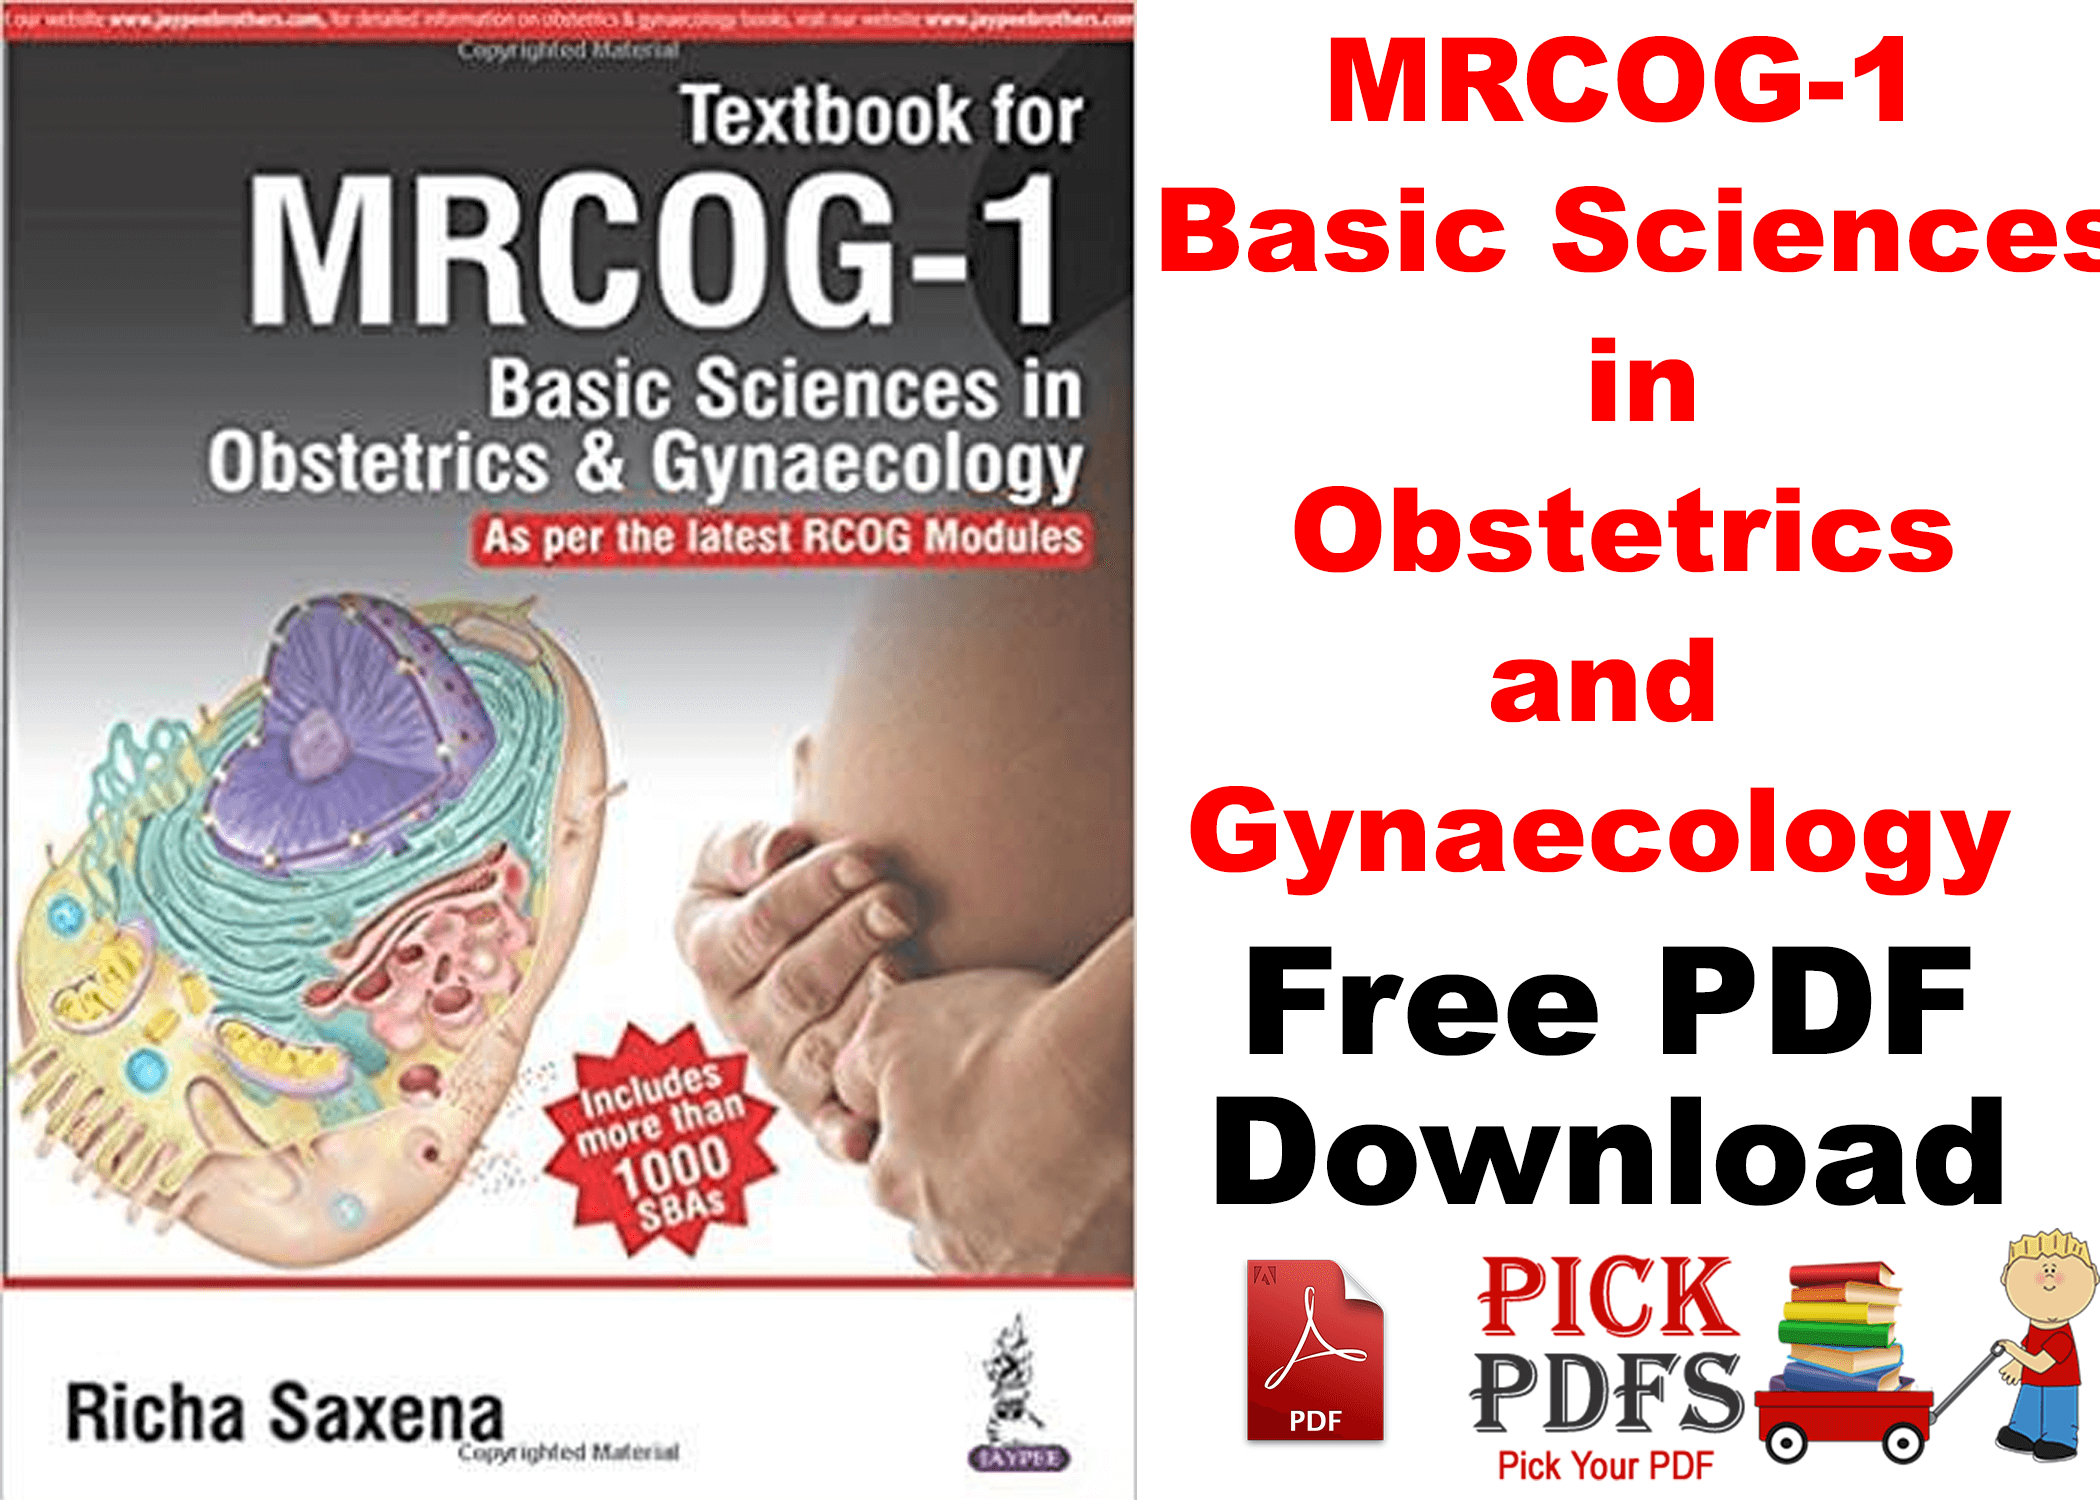 https://pickpdfs.com/download-blueprints-obstetrics-and-gynecology-pdf-7th-edition-free/